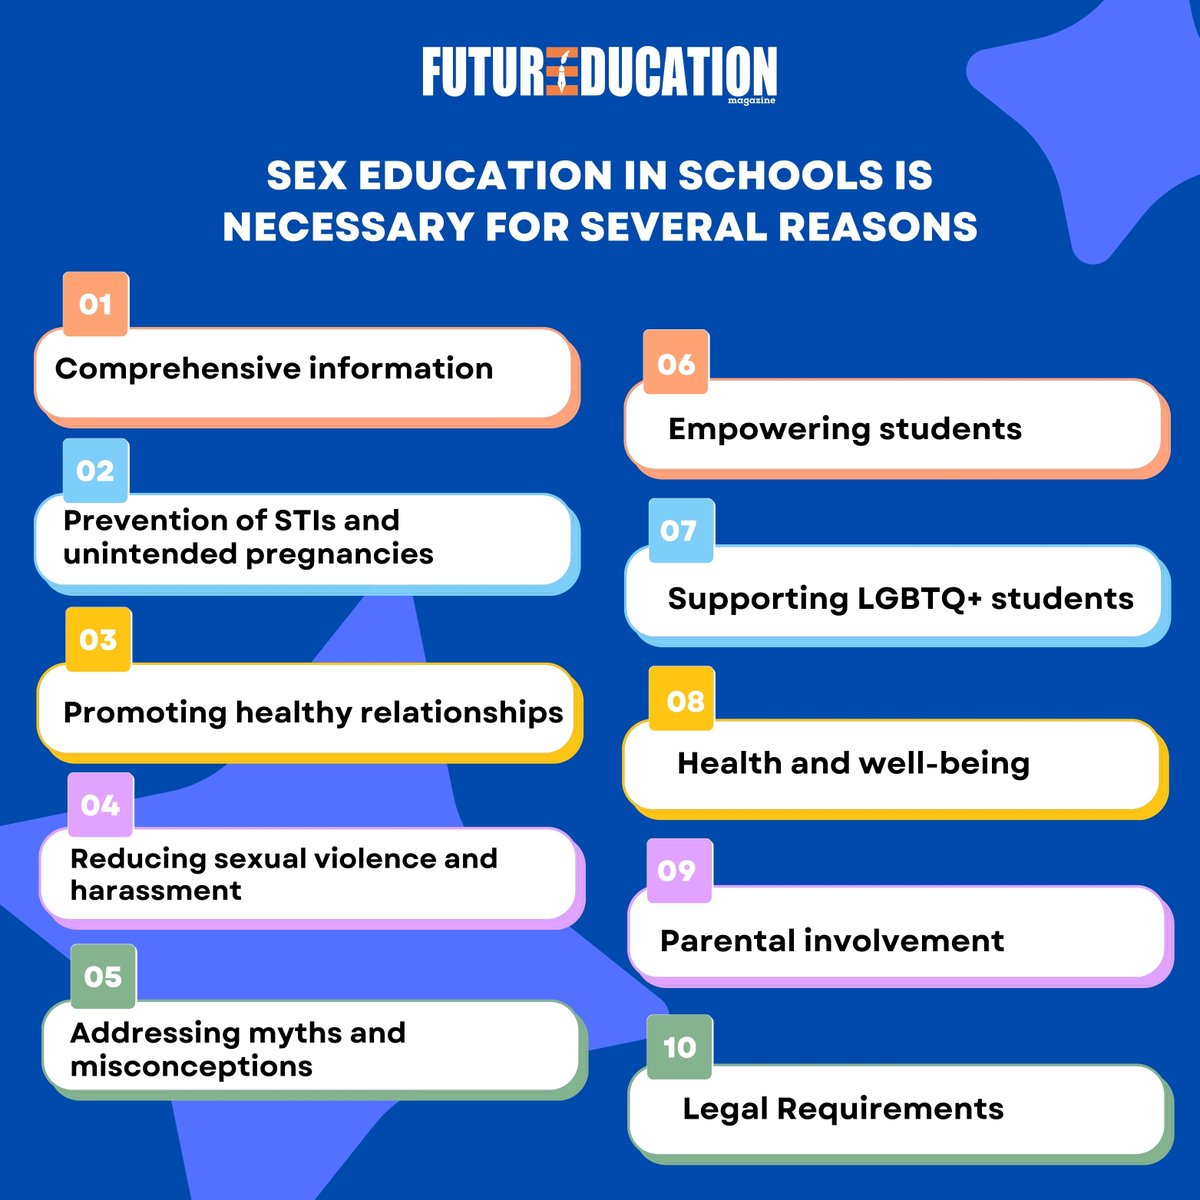 Sex education in schools is important because it provides accurate information about sexual health, relationships, and consent, helping students make informed decisions and stay safe.

Follow For More Future Education Magazine

#SexEdMatters #KnowledgeIsPower #InformedChoices